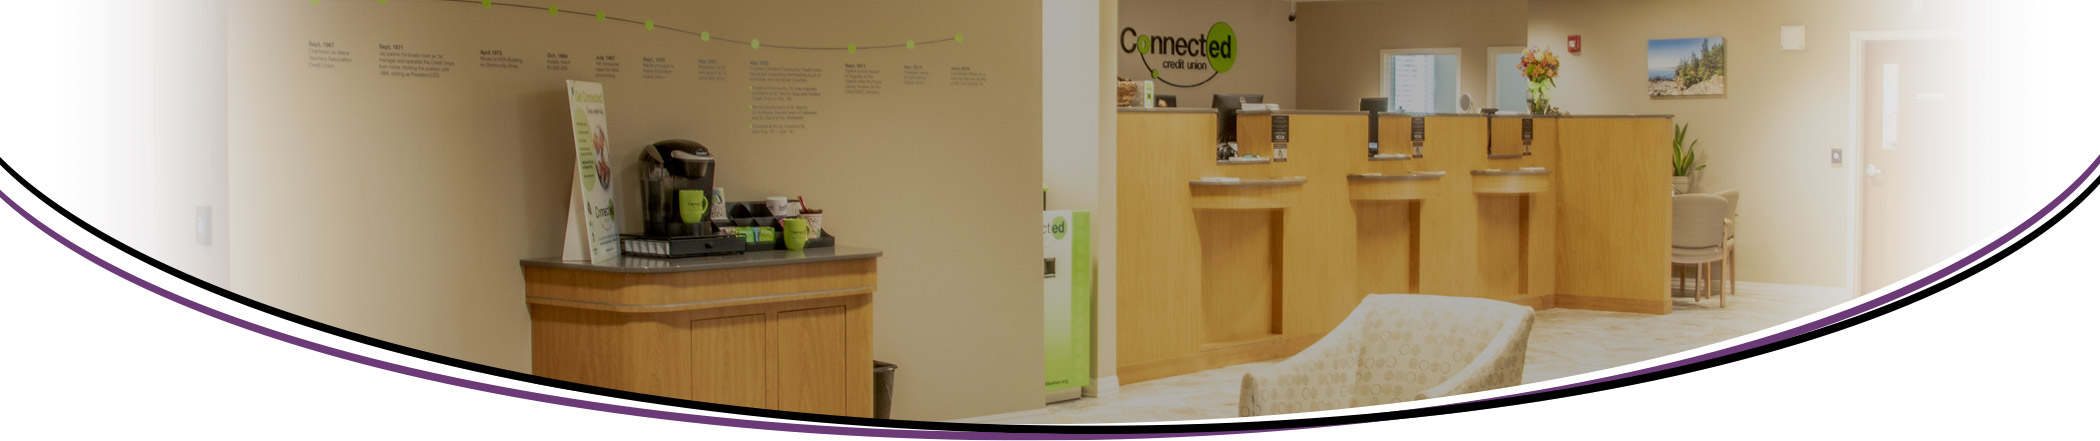 Connected Credit Union Interior